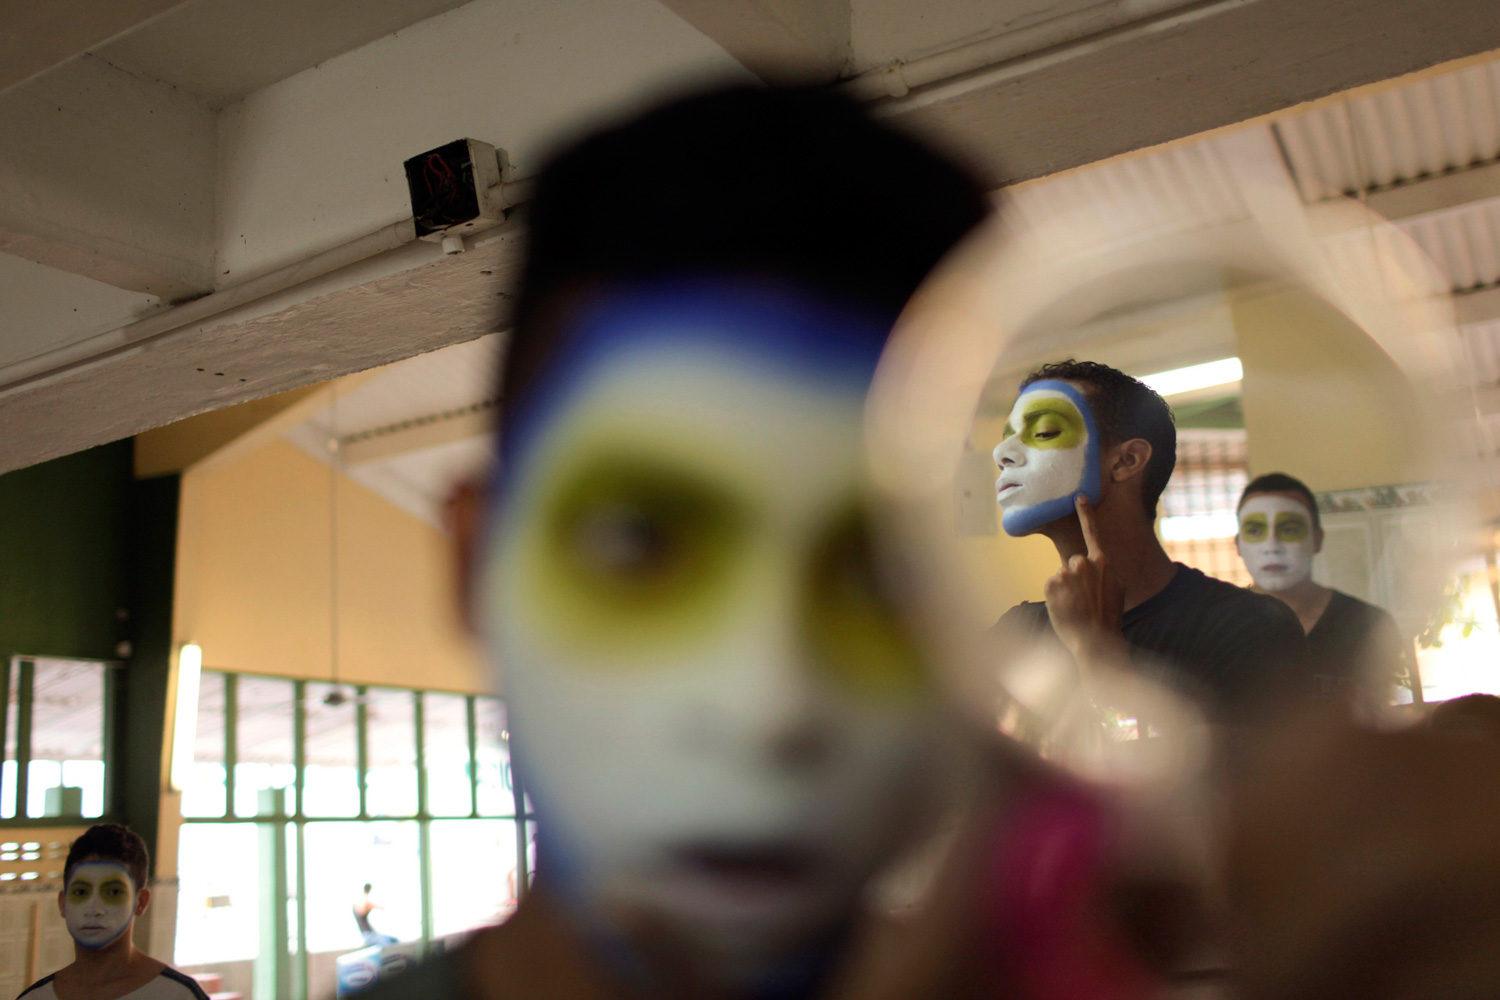 Feb. 18, 2012. A boy with a painted face holds a mirror that reflects other boys, during preparations before a parade as part of the Barranquilla Carnival in Barranquilla, Colombia.